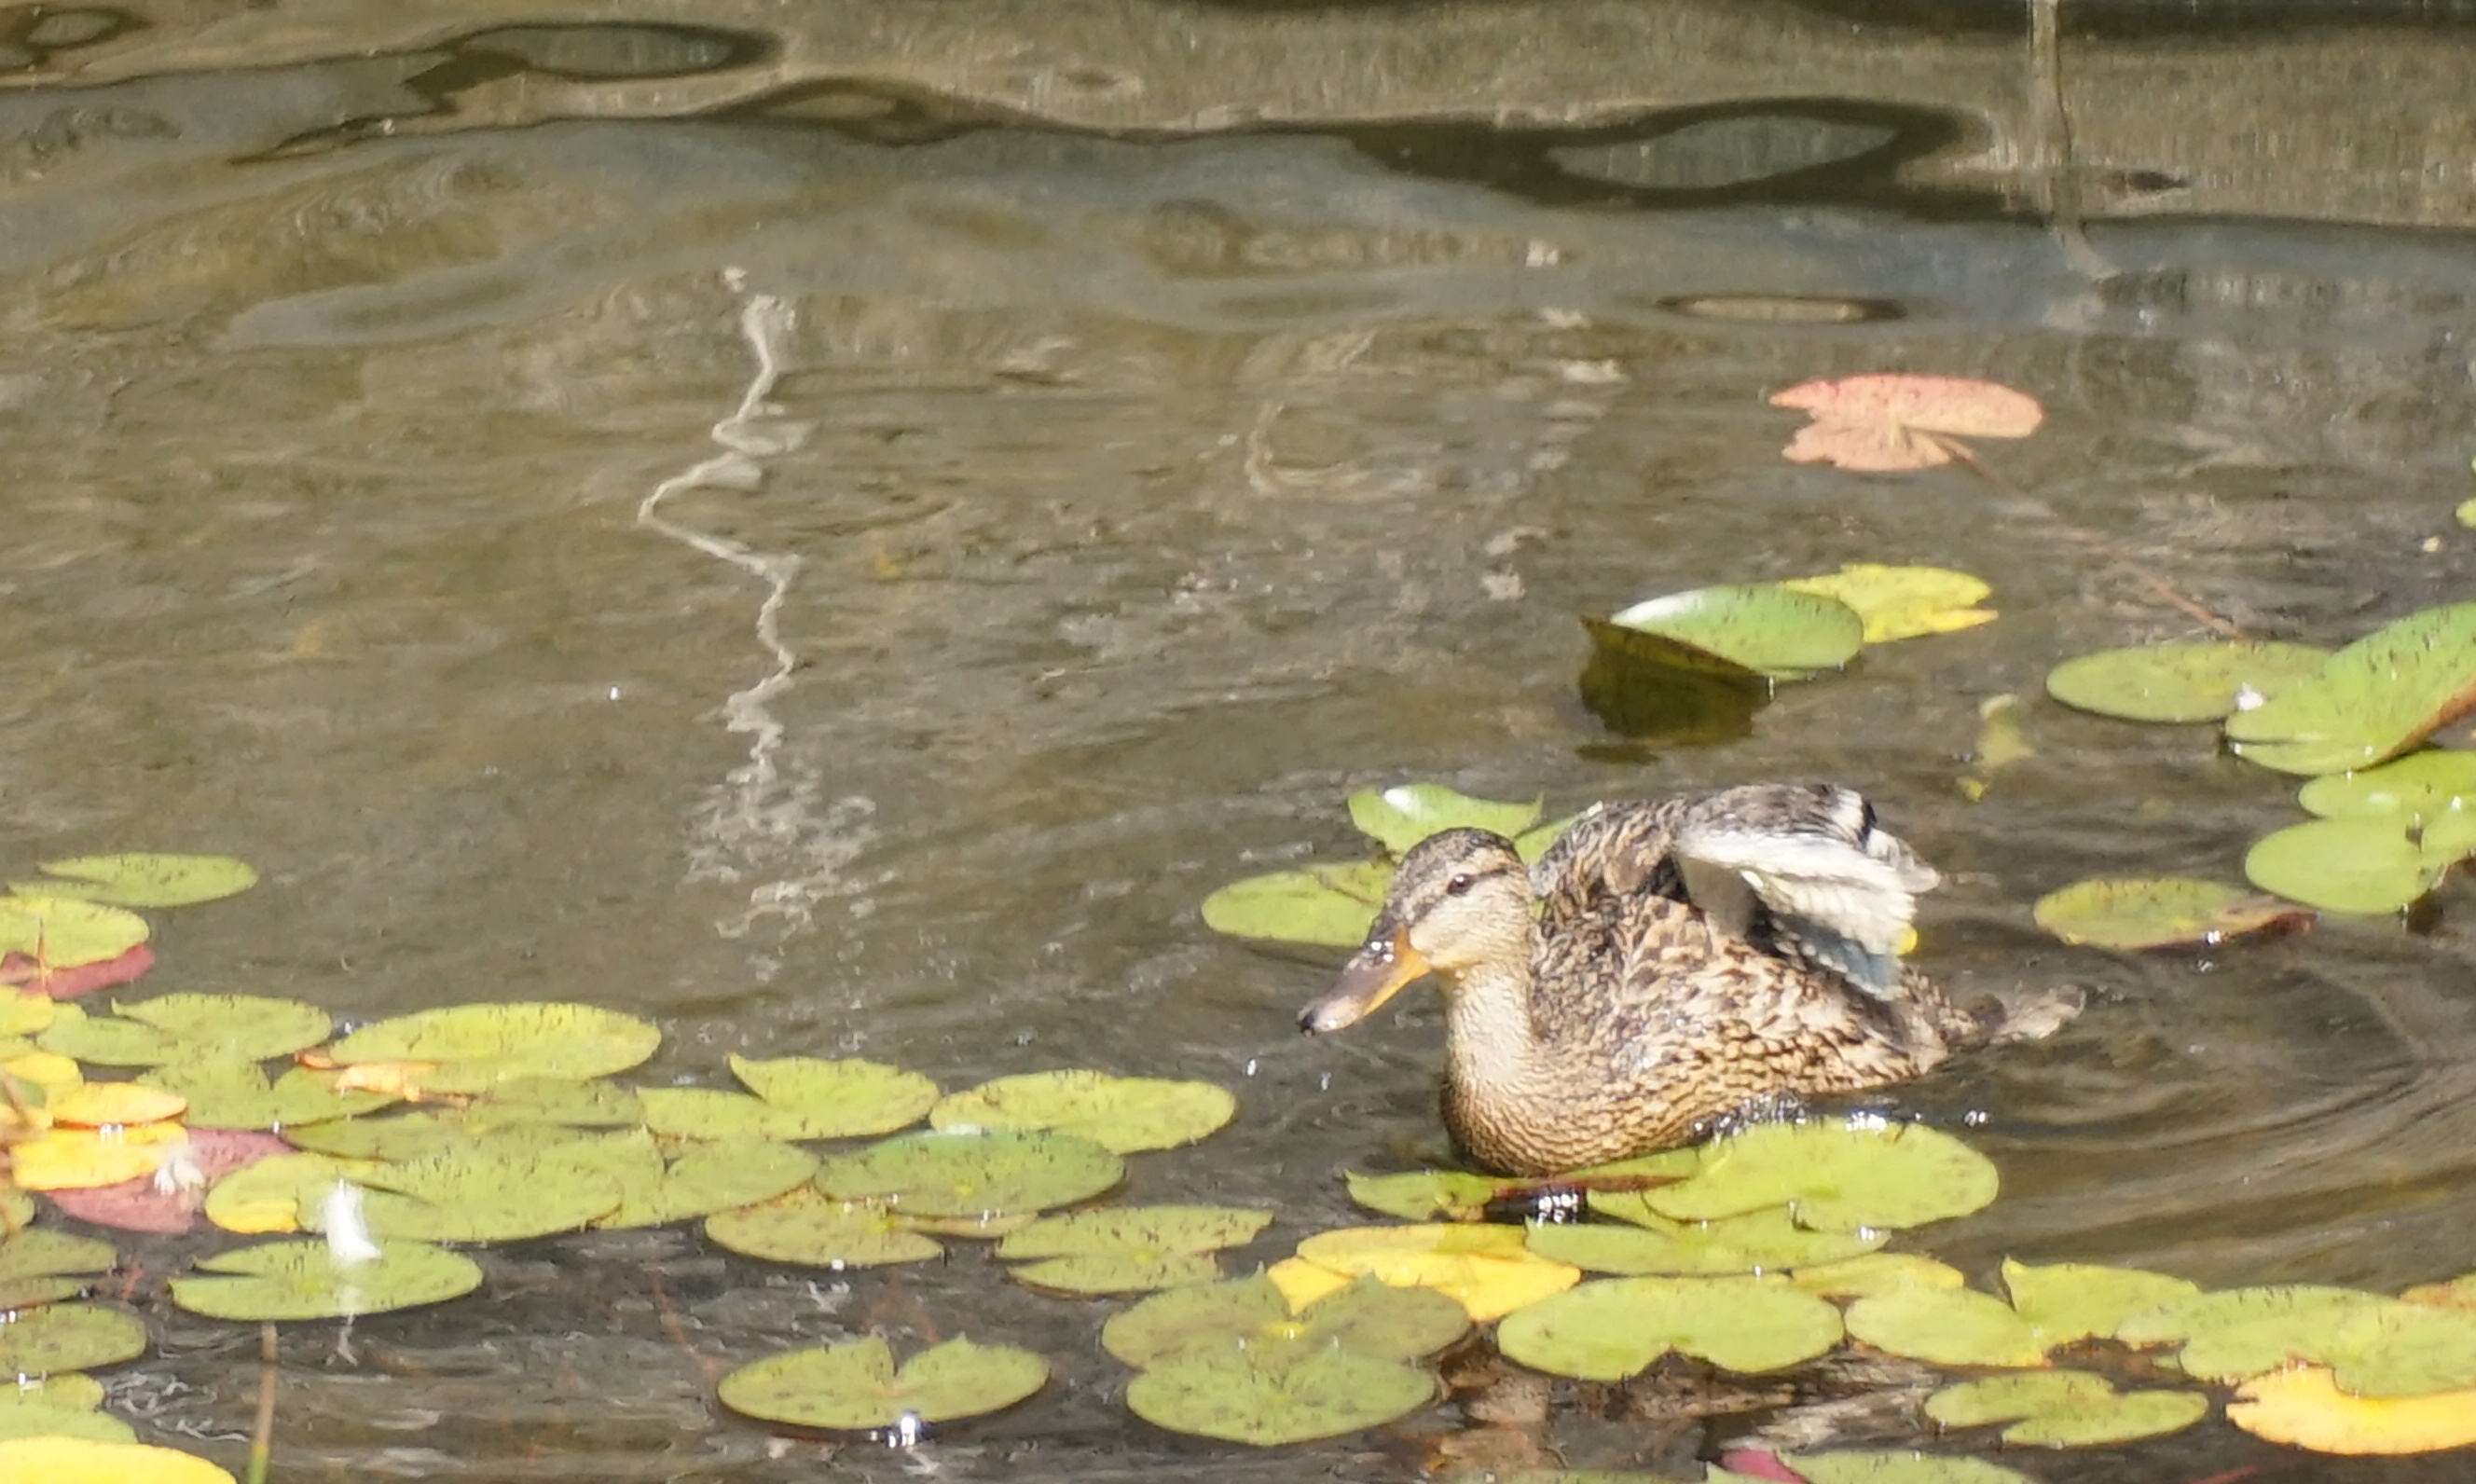 Duckling testing new wings 7-27-2014